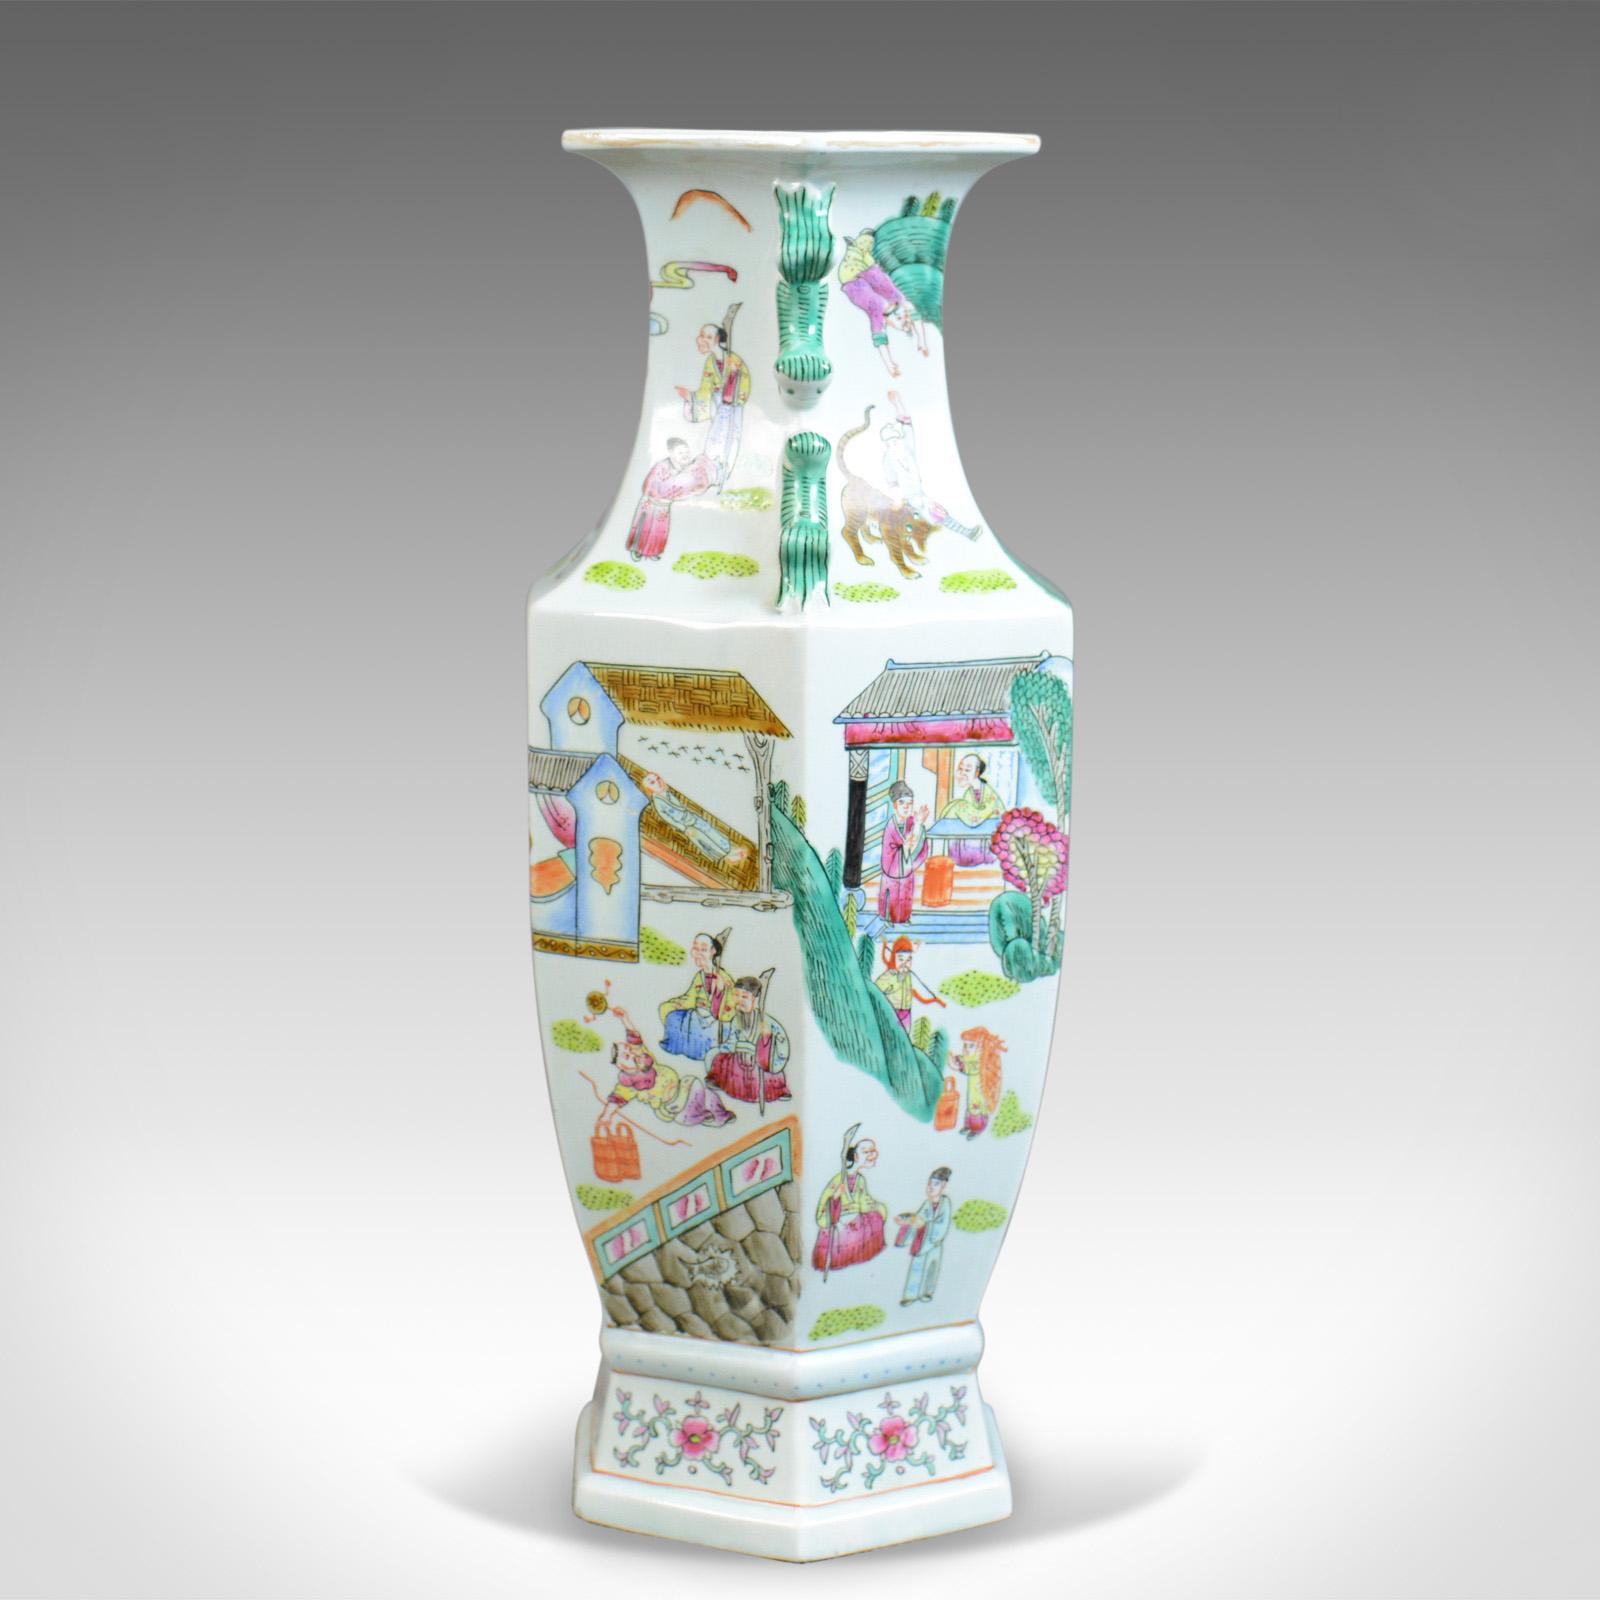 This is a midcentury hexagonal baluster vase, a 20th century, Chinese ceramic urn. 

Attractive Chinese baluster vase
Profusely decorated from neck to base
Free from any damage or marks
Unmarked base

Street scene with shops, figures and